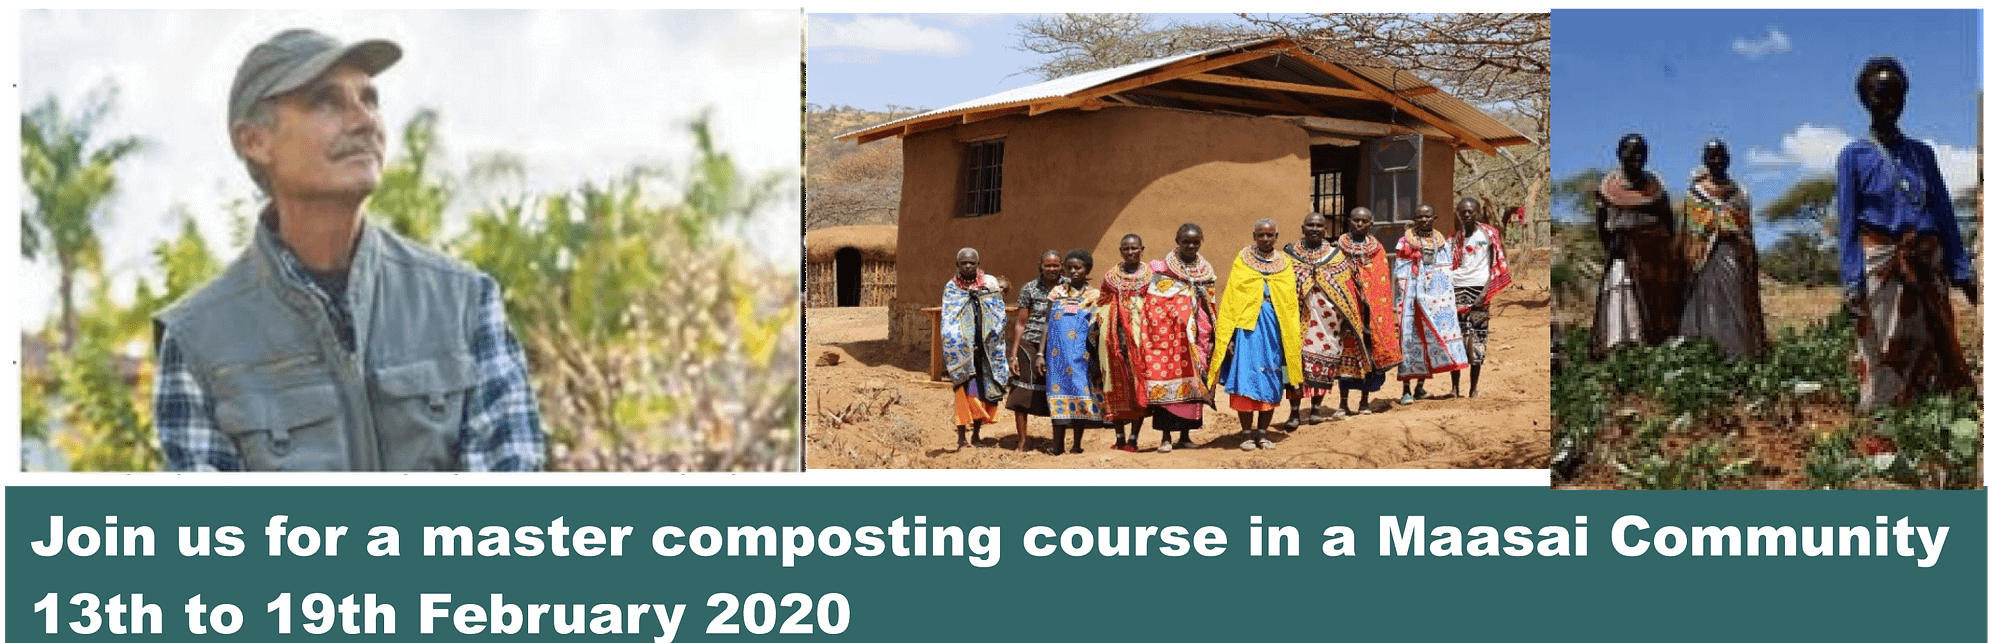 MASTER COMPOSTING COURSE IN A MAASAI COMMUNITY IN LAIKIPIA NORTH WITH PETER ASH